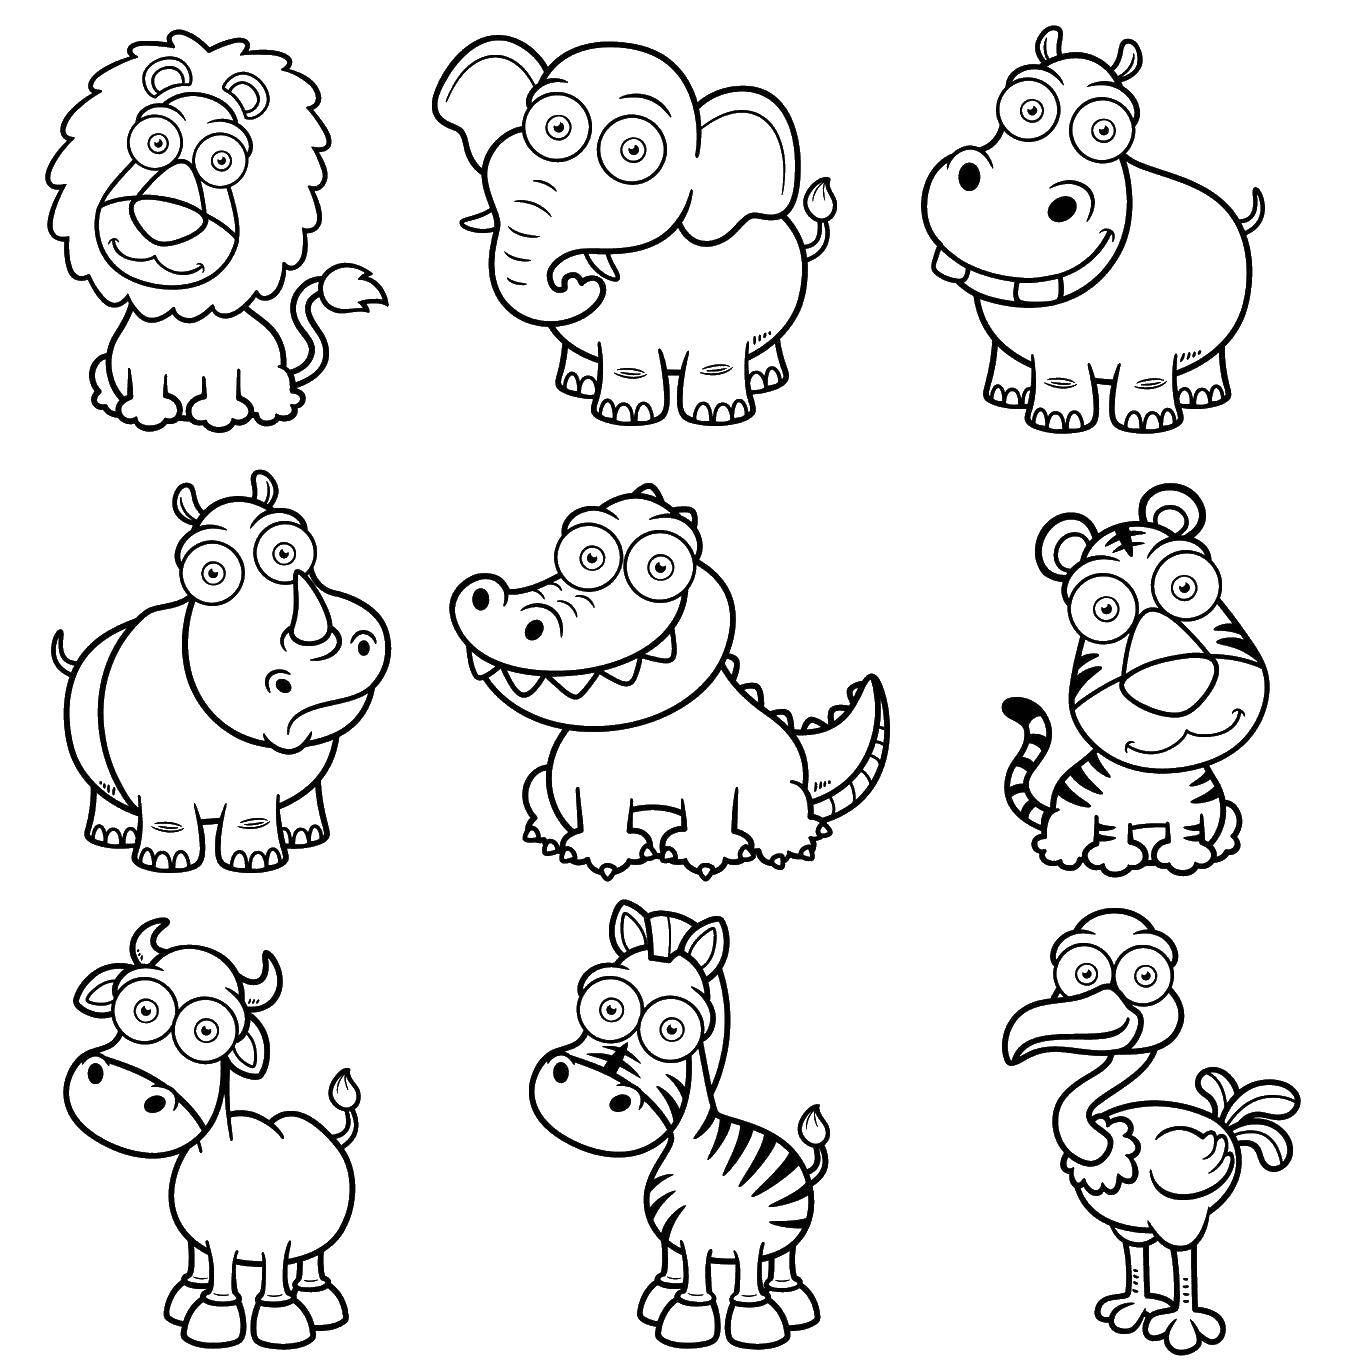 Coloring Elephant, lion, crocodile, Rhino, Hippo, tiger, cow, Zebra and ostrich. Category Zoo. Tags:  Zoo, animals.